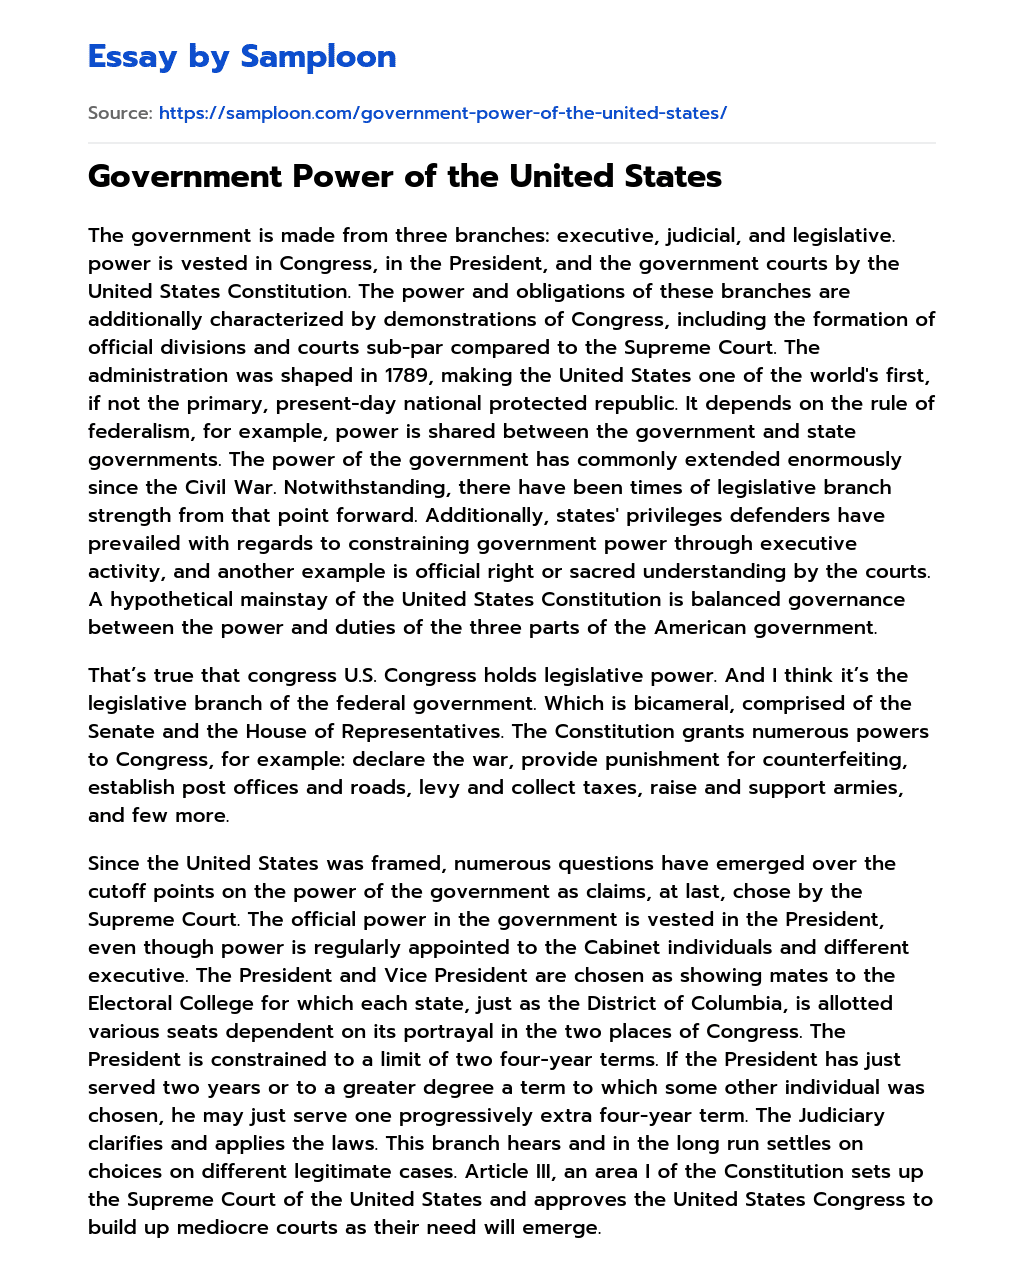 Government Power of the United States essay